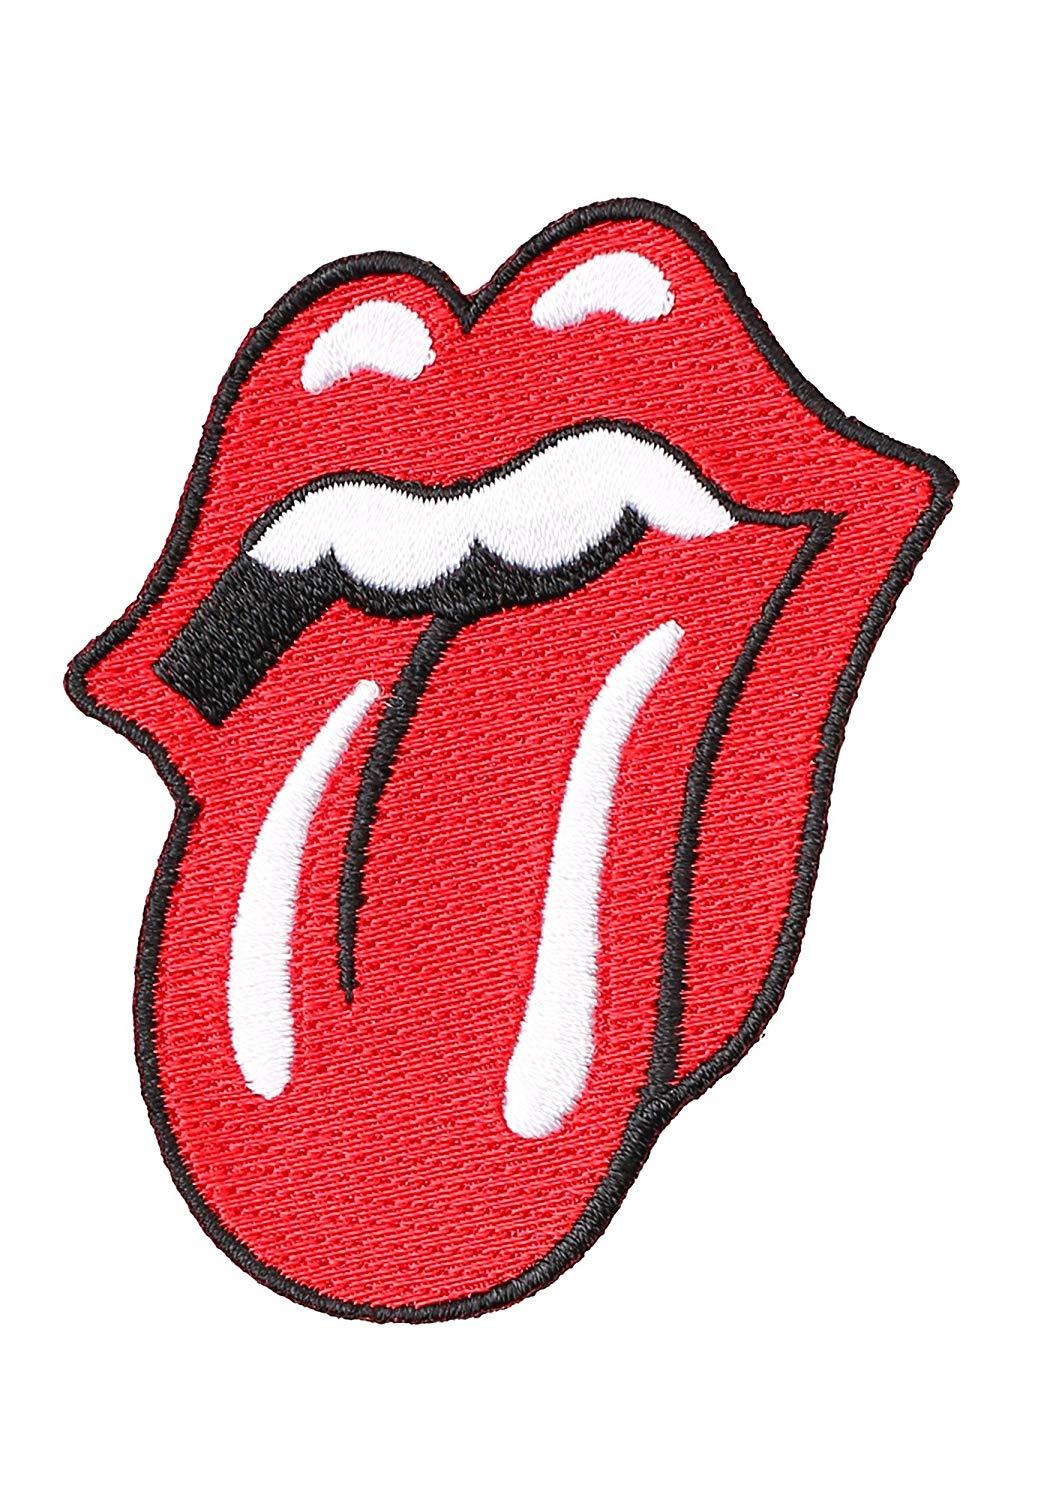 Red Lip and Toungue Logo - Amazon.com: Rolling Stones Tongue Logo Patch Standard: Clothing